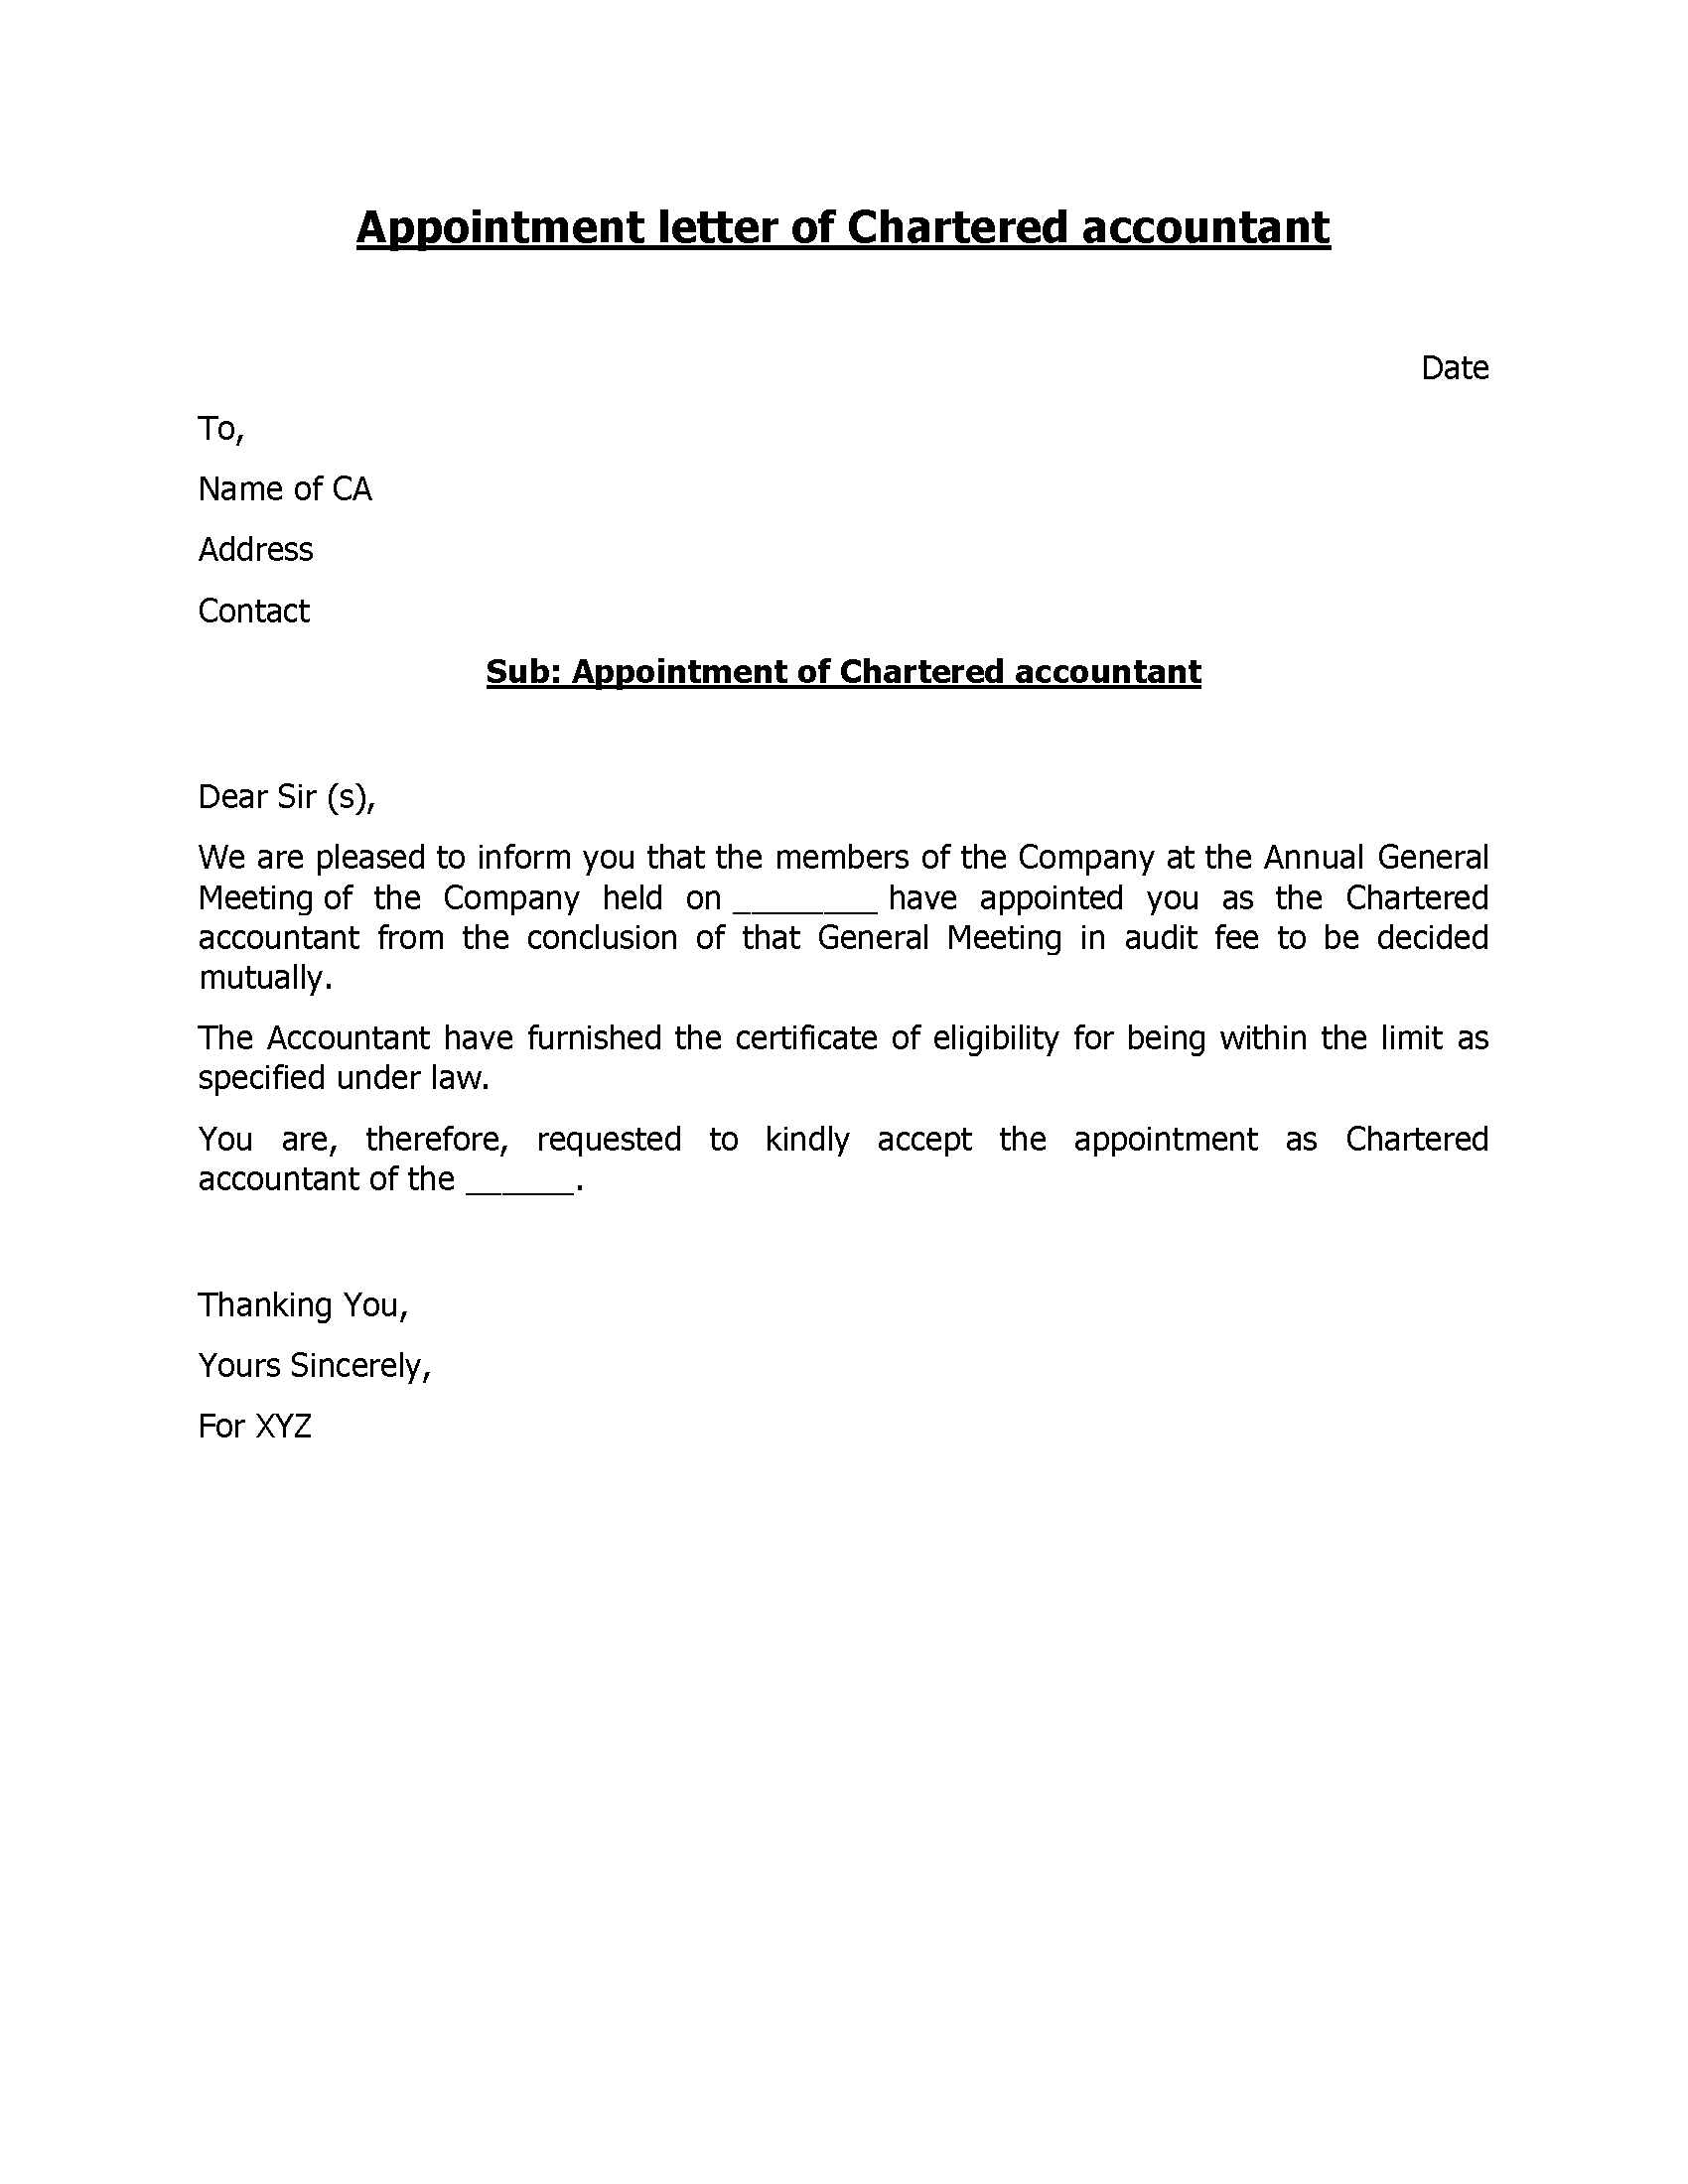 Appointment Letter Of Chartered Accountant